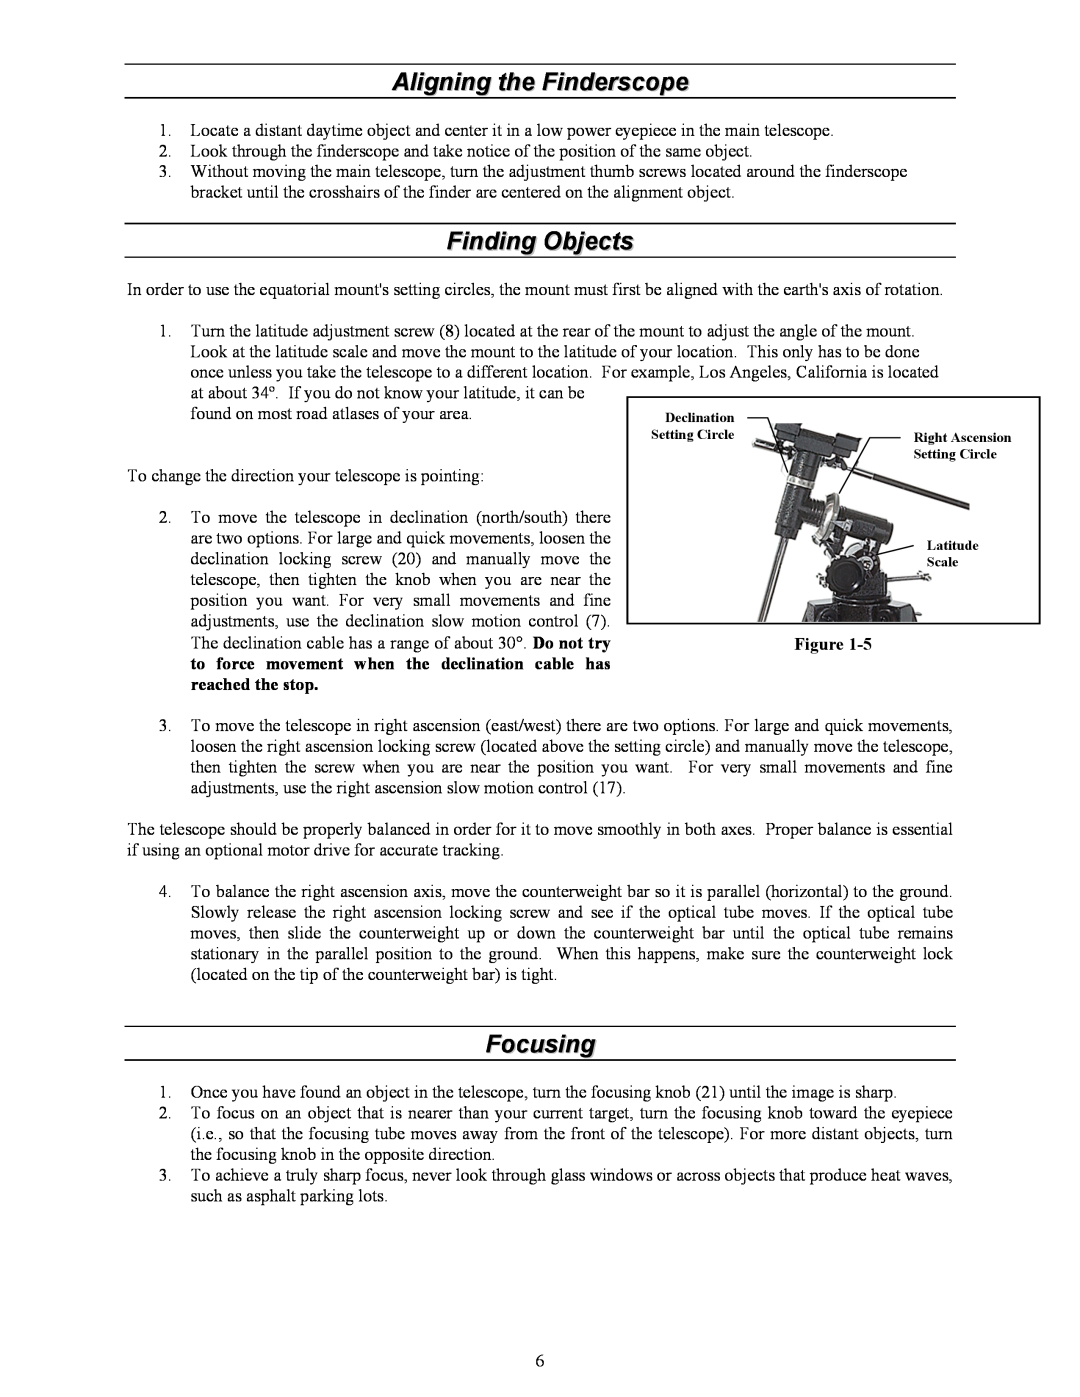 Celestron 114 manual Aligning the Finderscope, Finding Objects, Focusing, to force movement when the declination cable has 